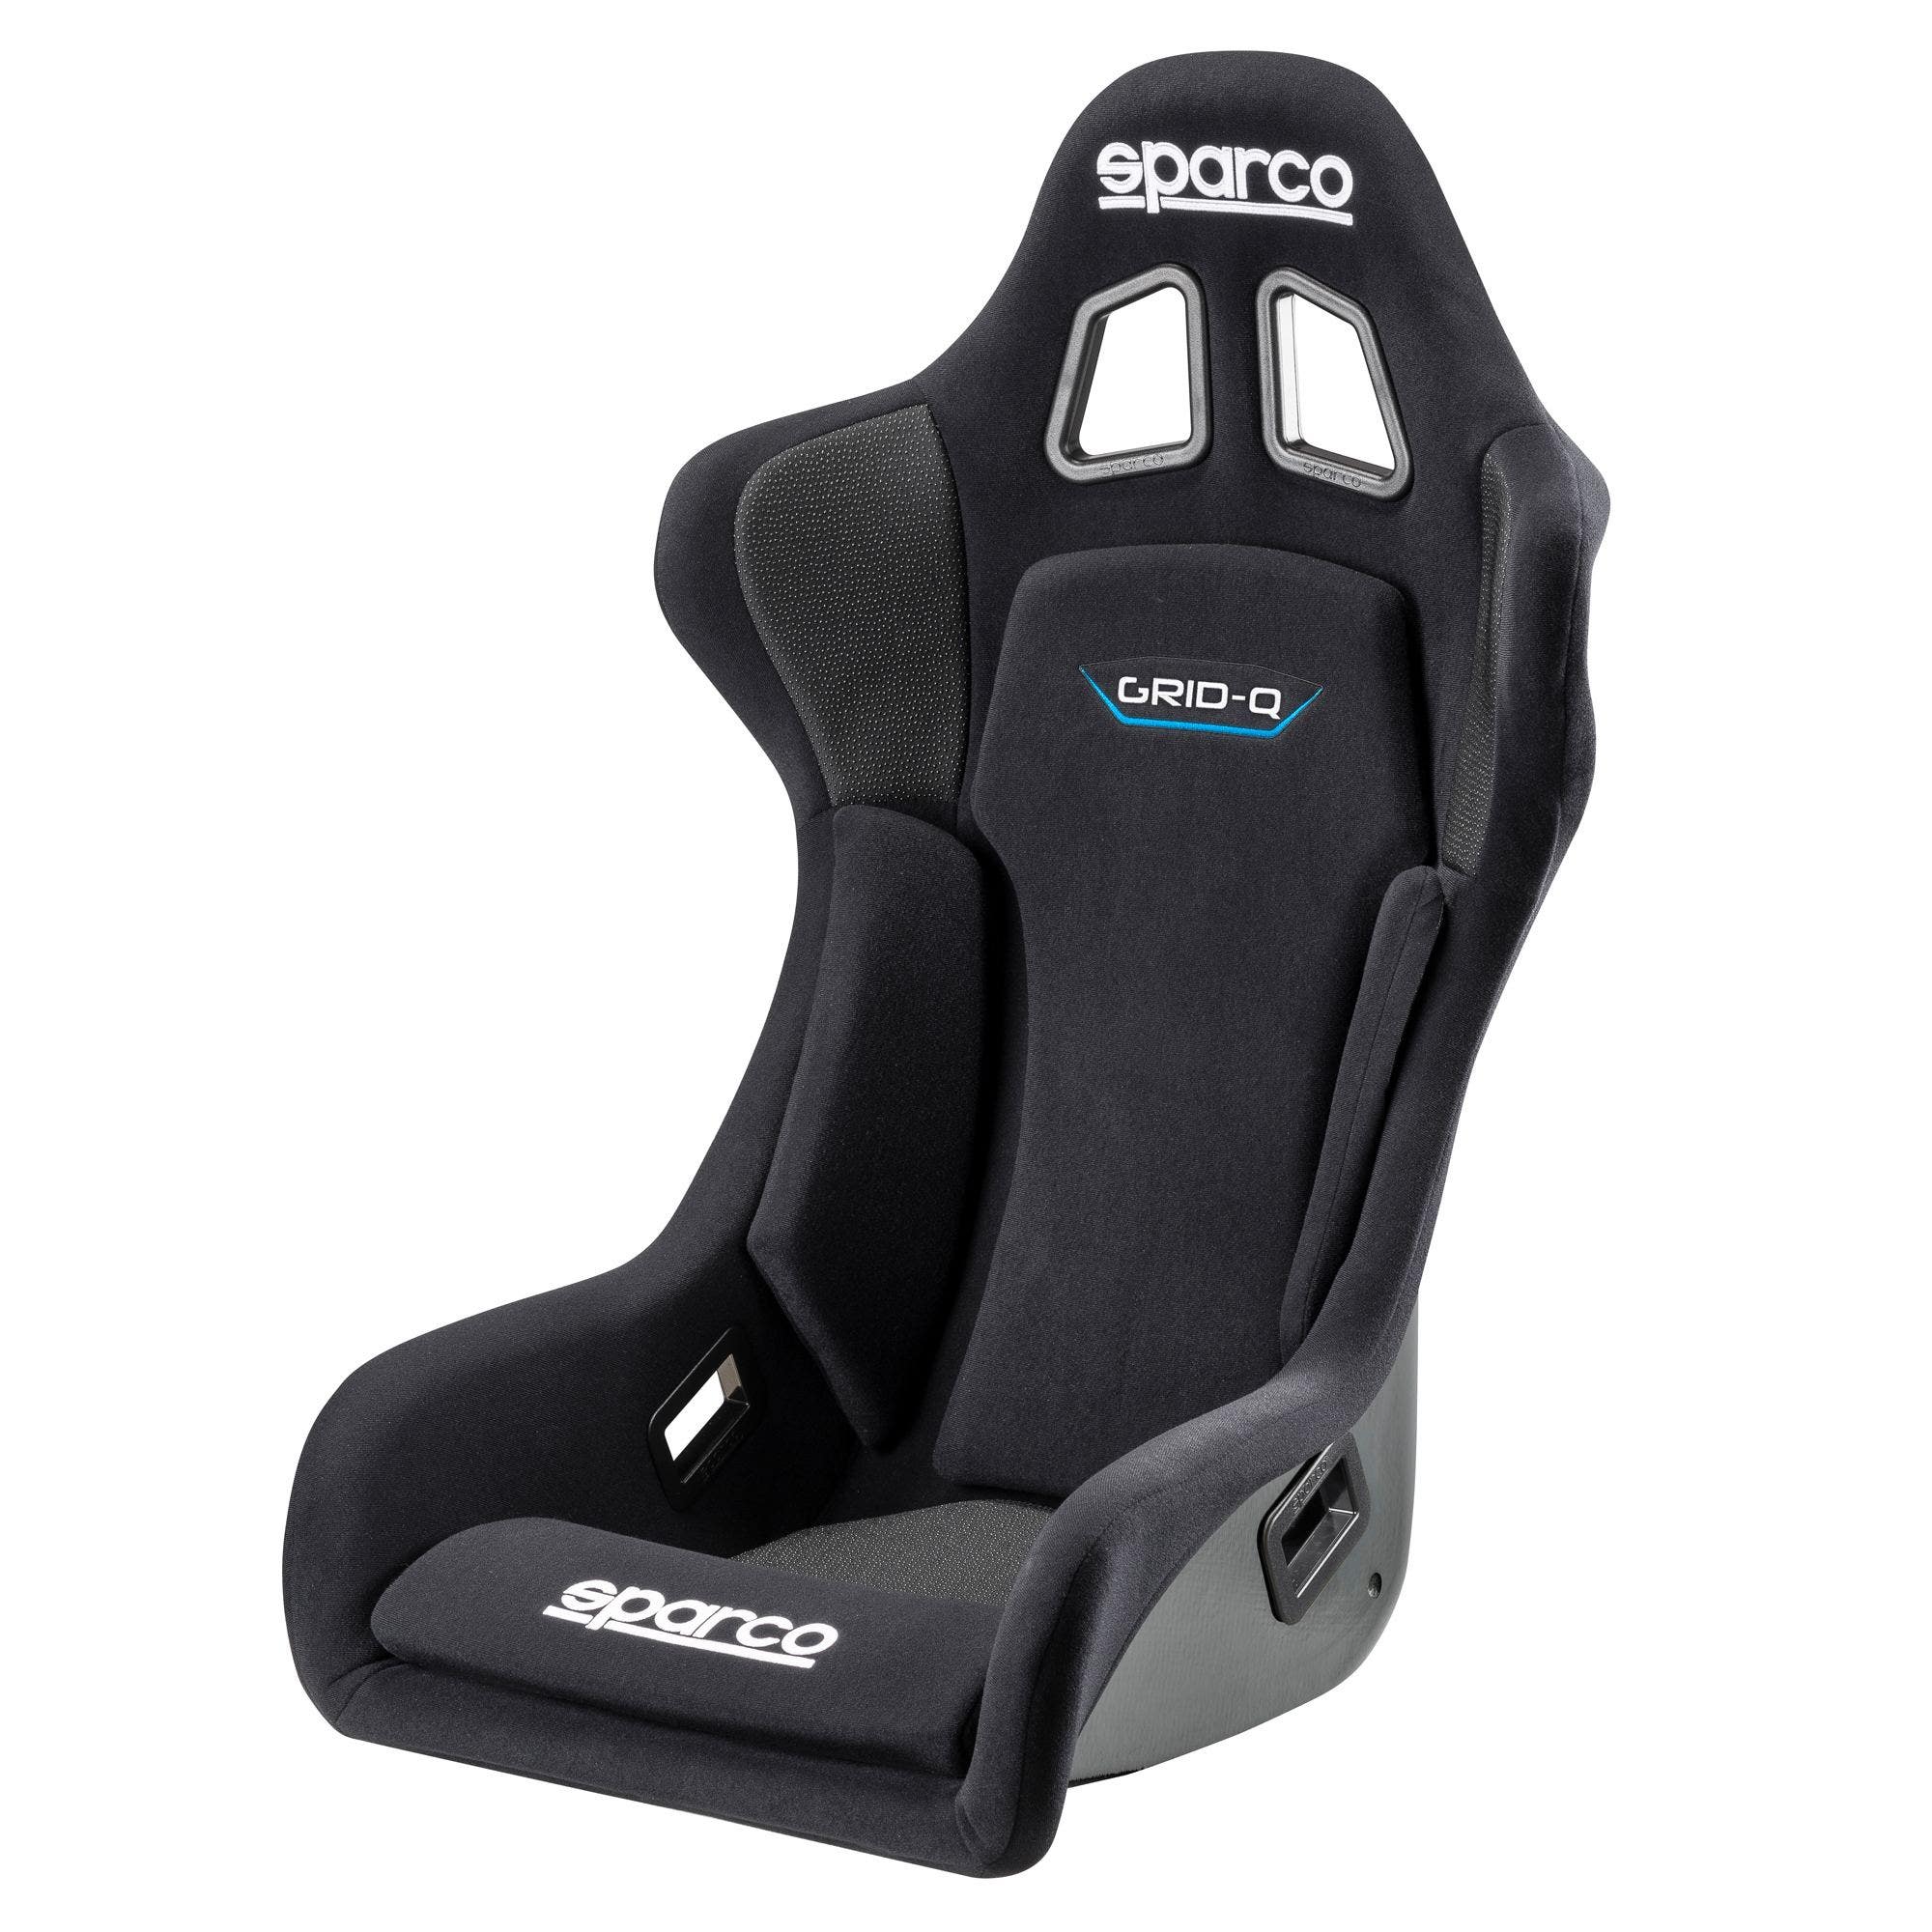 Sparco GRID-Q Racing Seat 008009